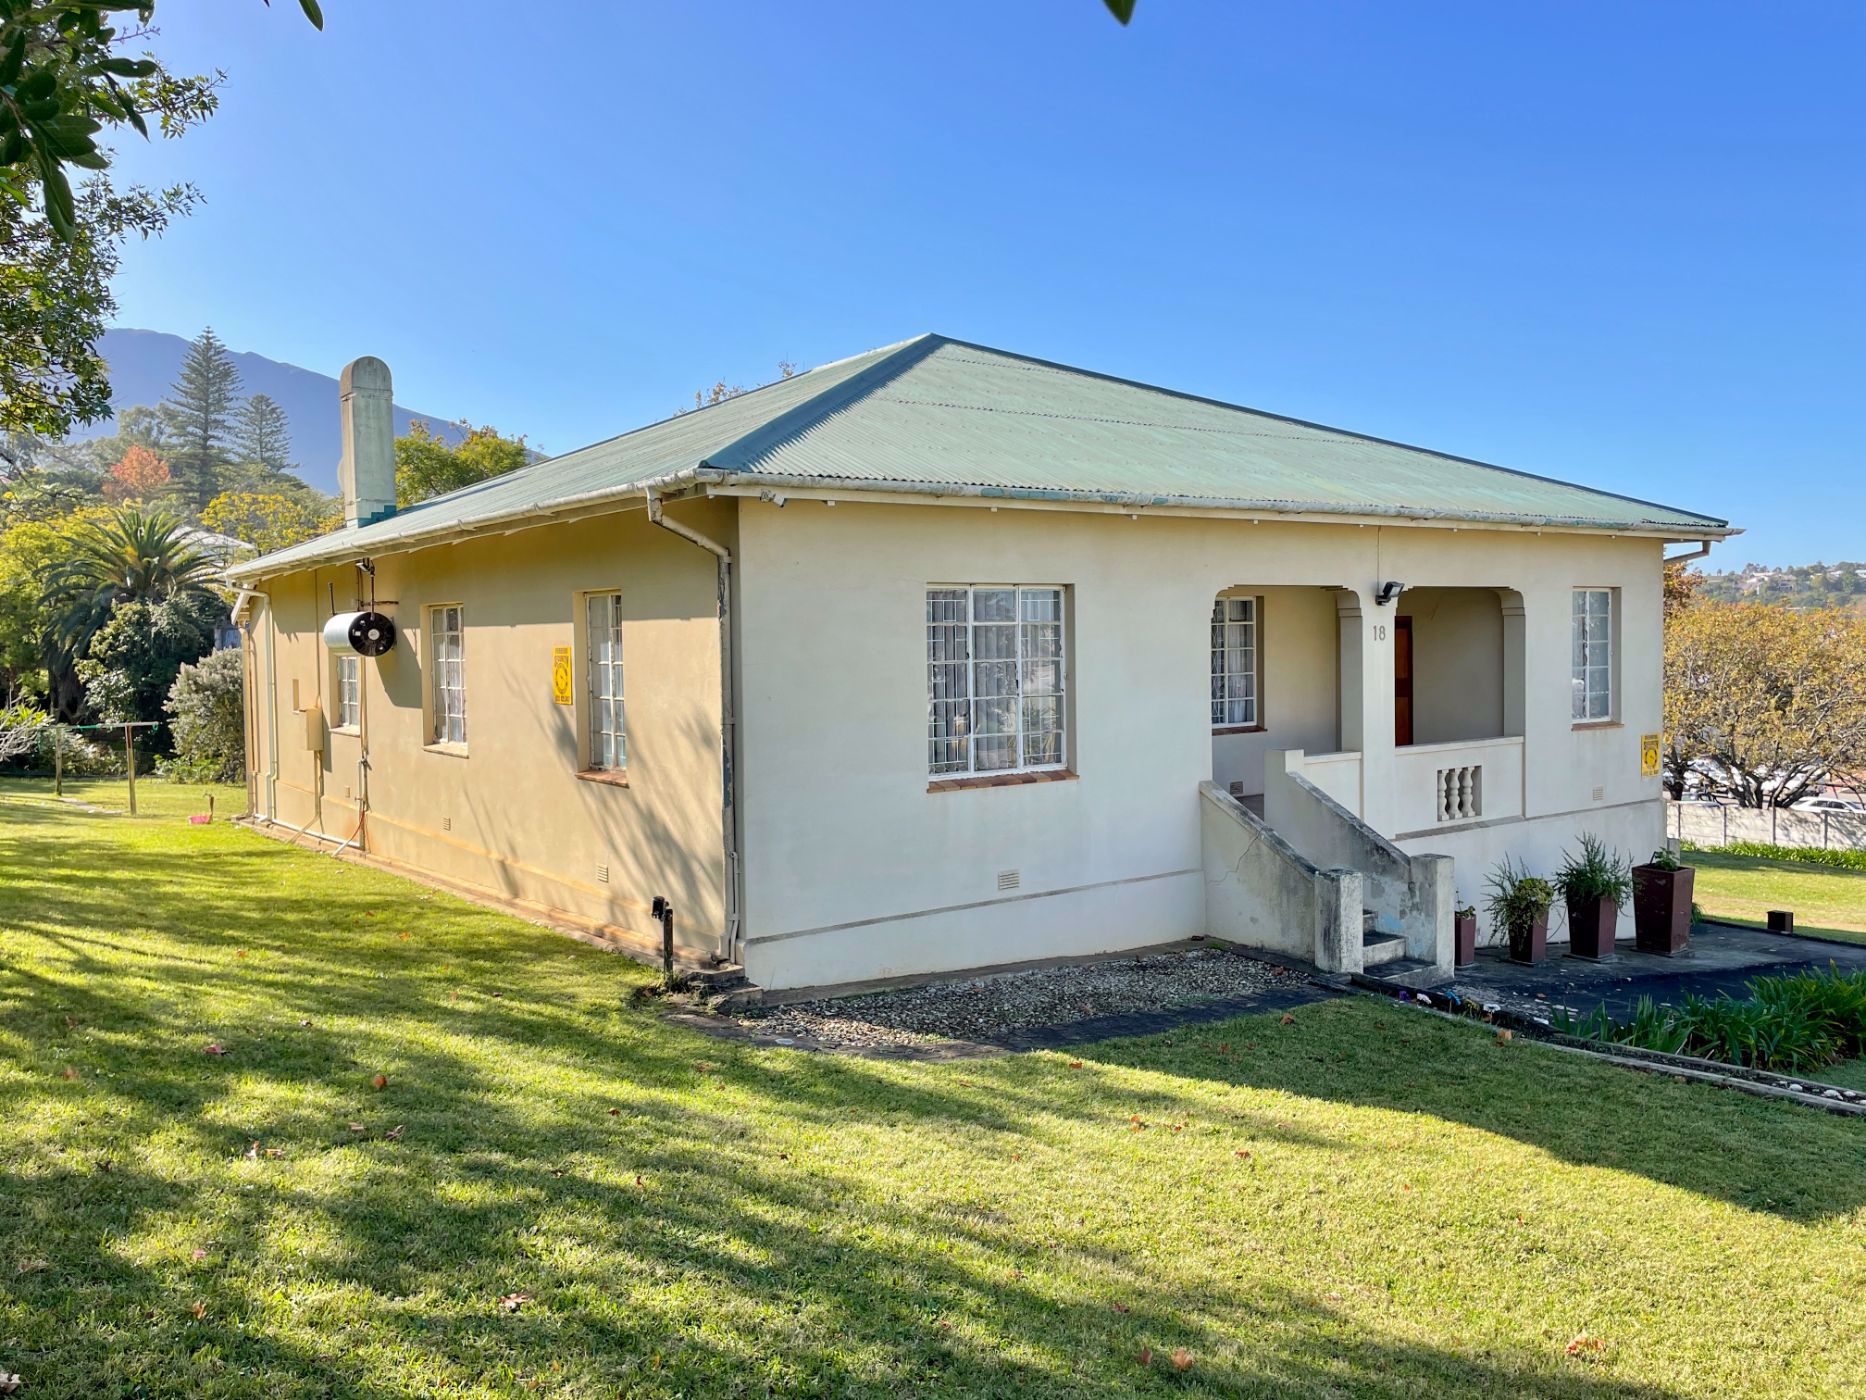 3 bedroom house for sale in Swellendam